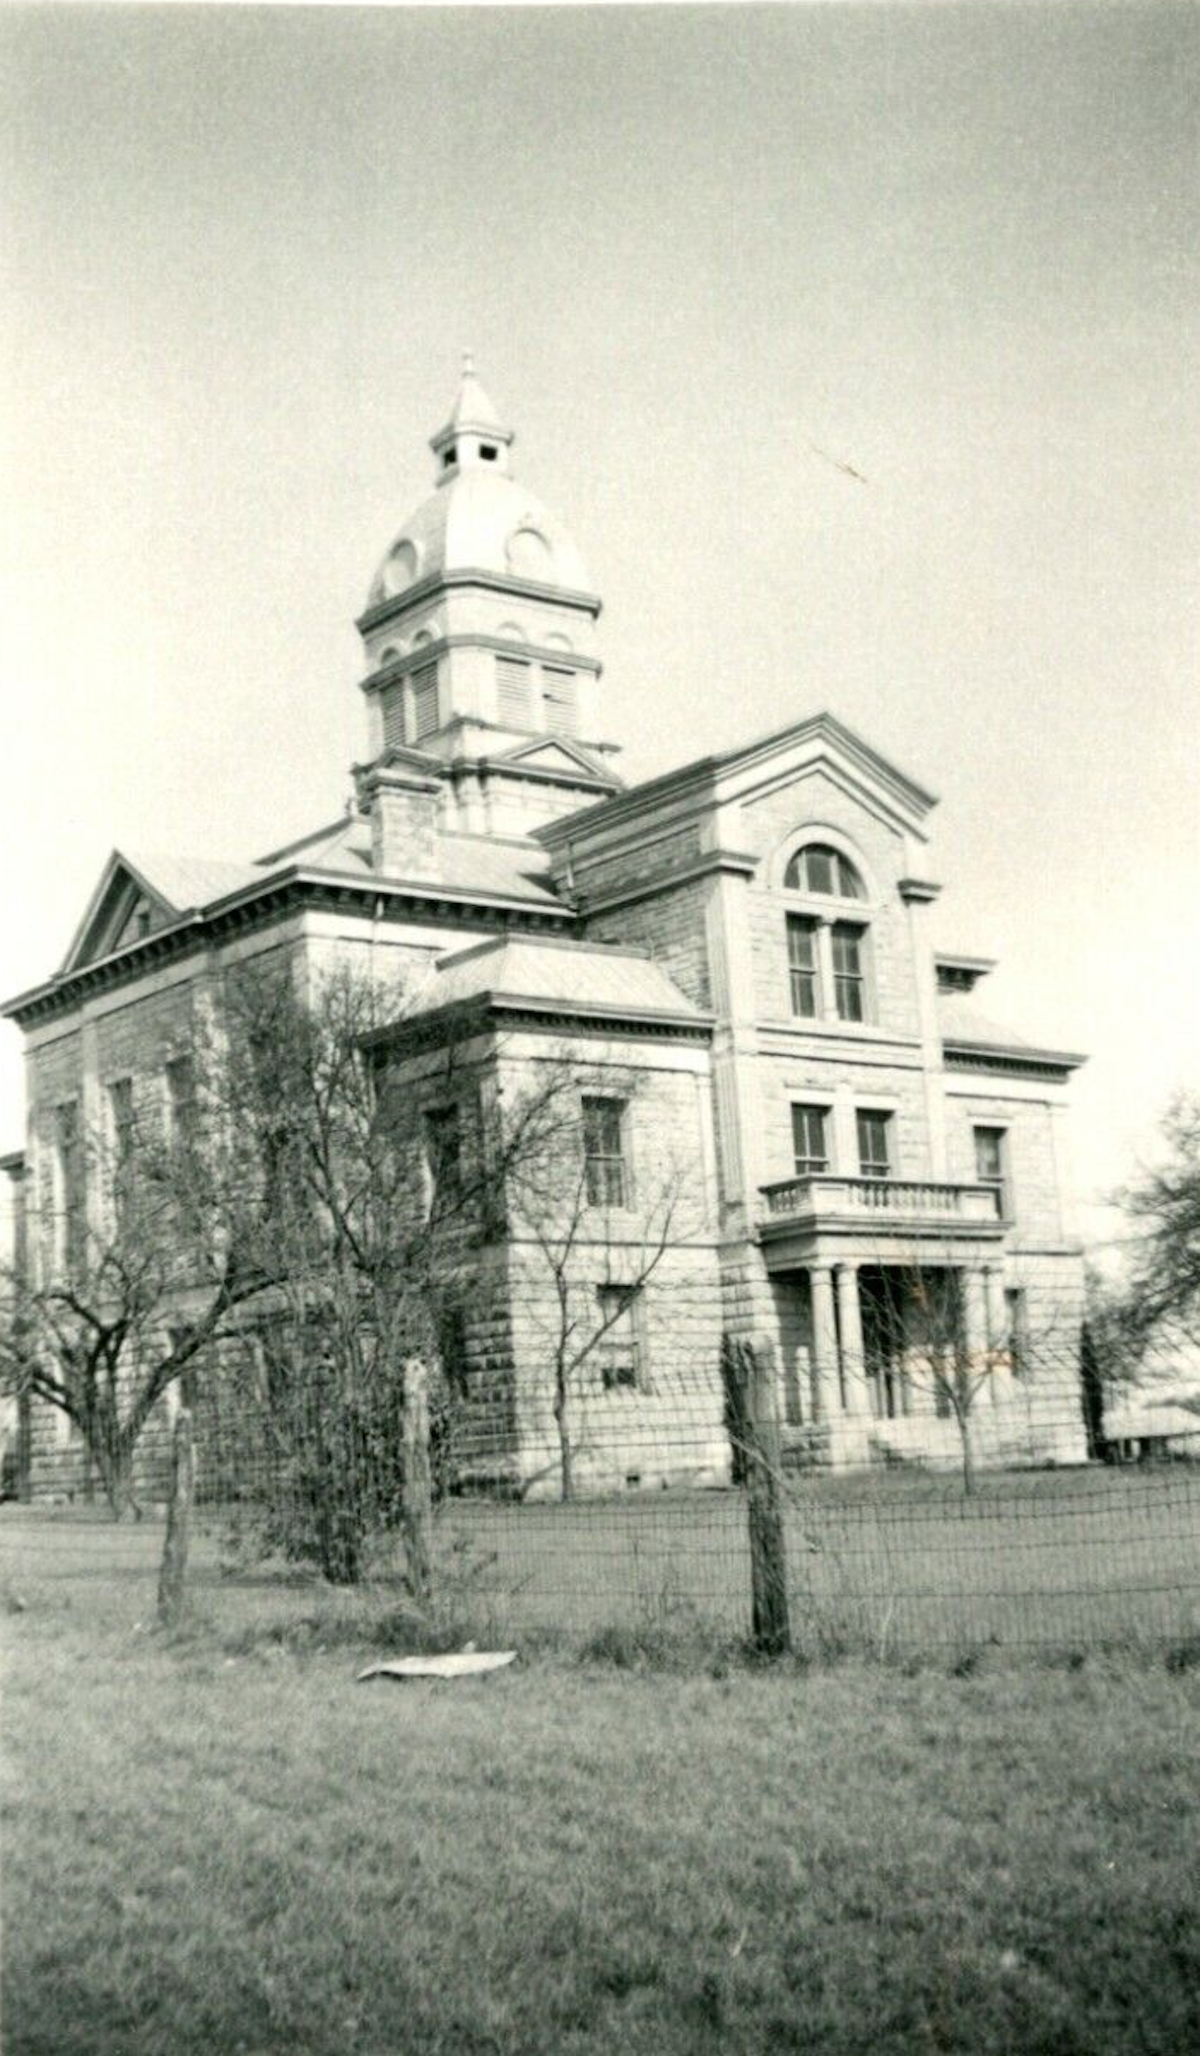 Bandera County Courthouse in 1940s